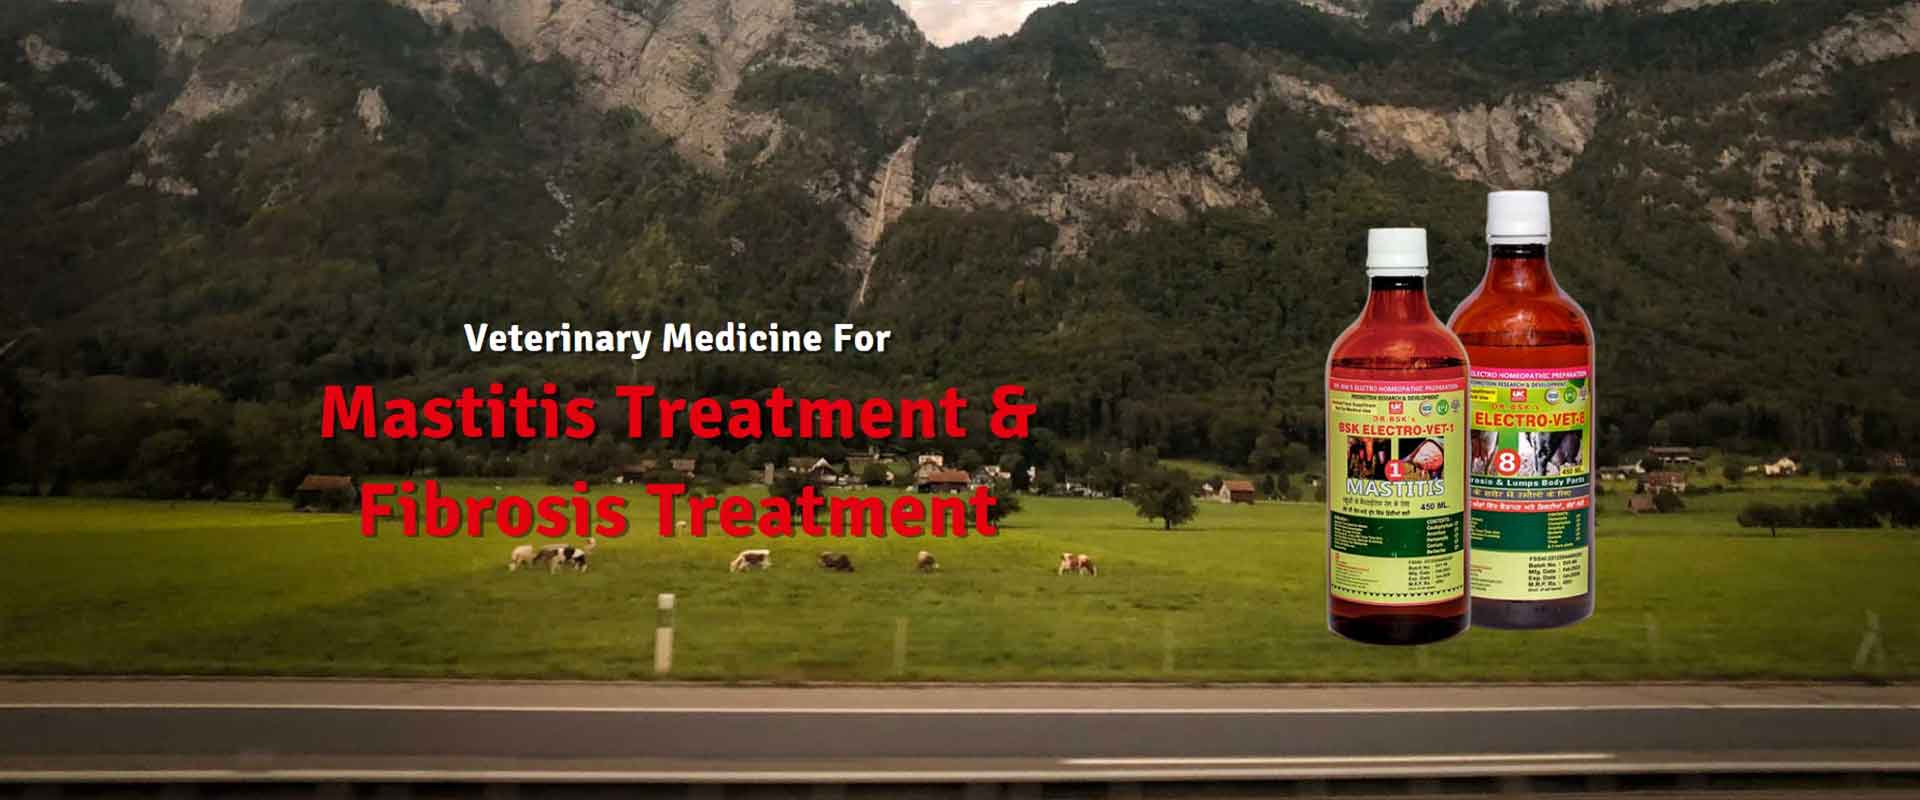 Veterinary Medicine For Mastitis Treatment and Fibrosis Treatment in Punjab